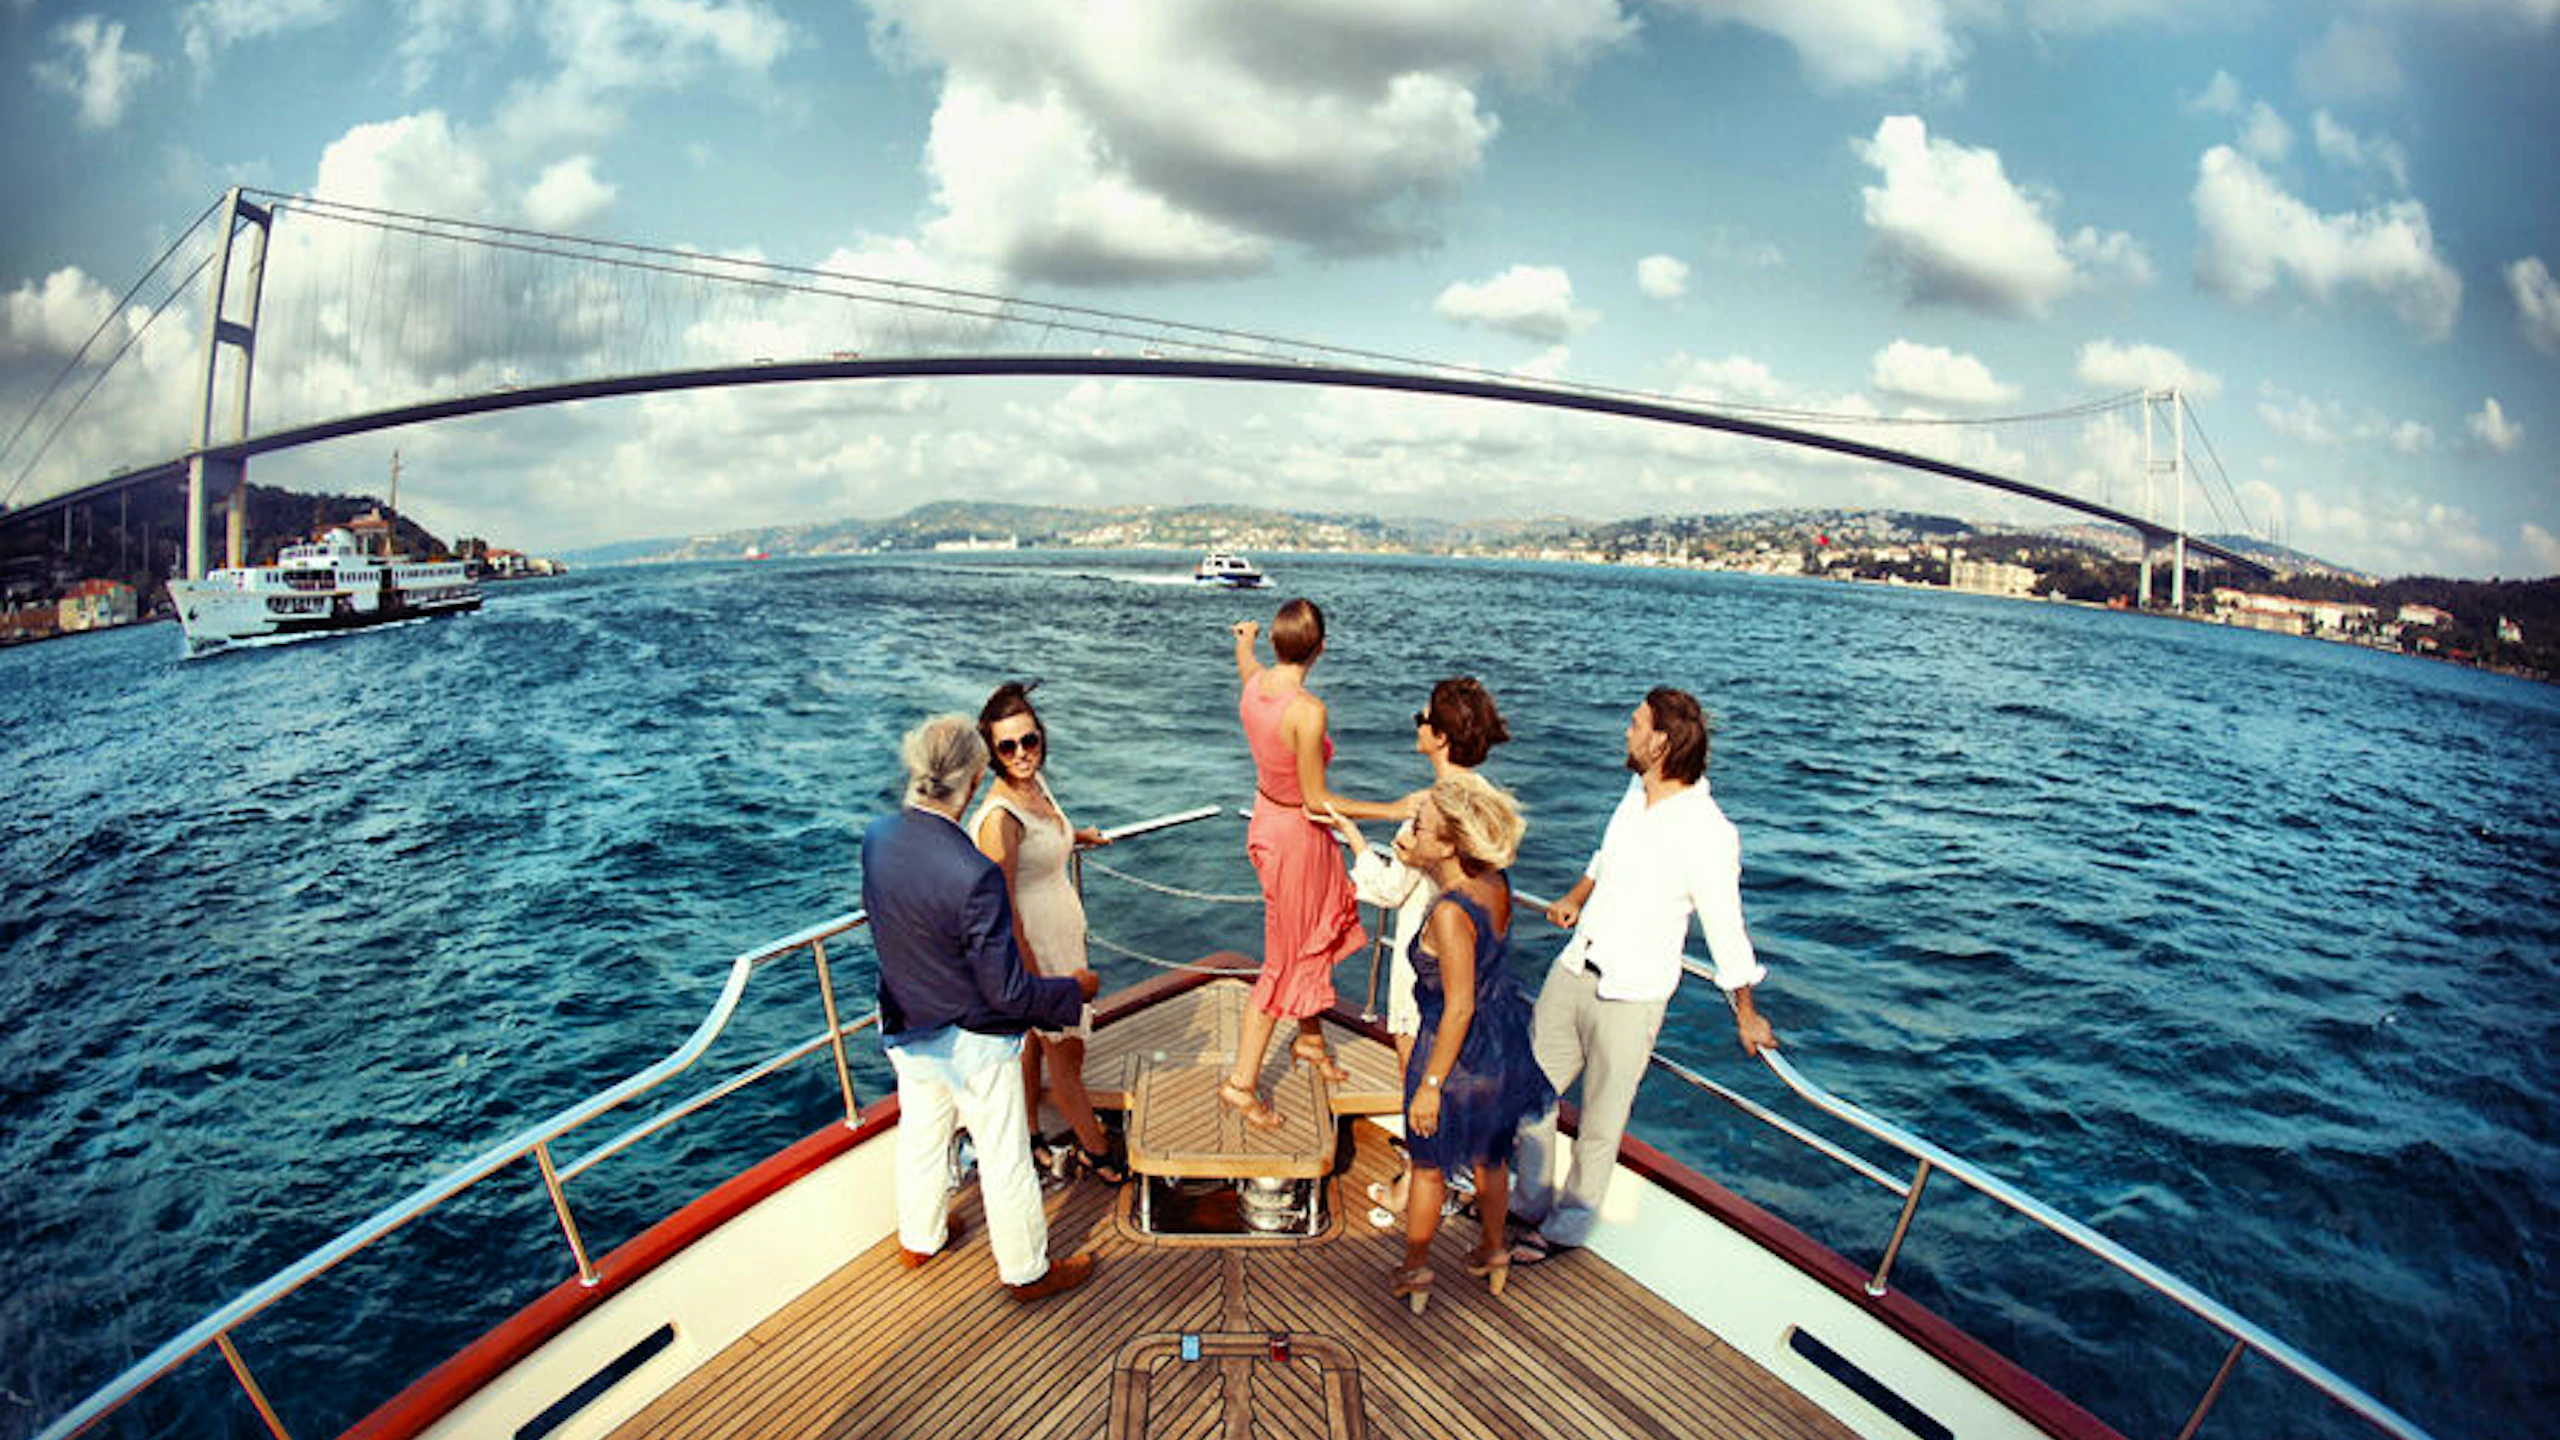 Half-day Istanbul Sightseeing by Bosphorus Cruise with Pierre Loti Hill Cable Car Ride Price